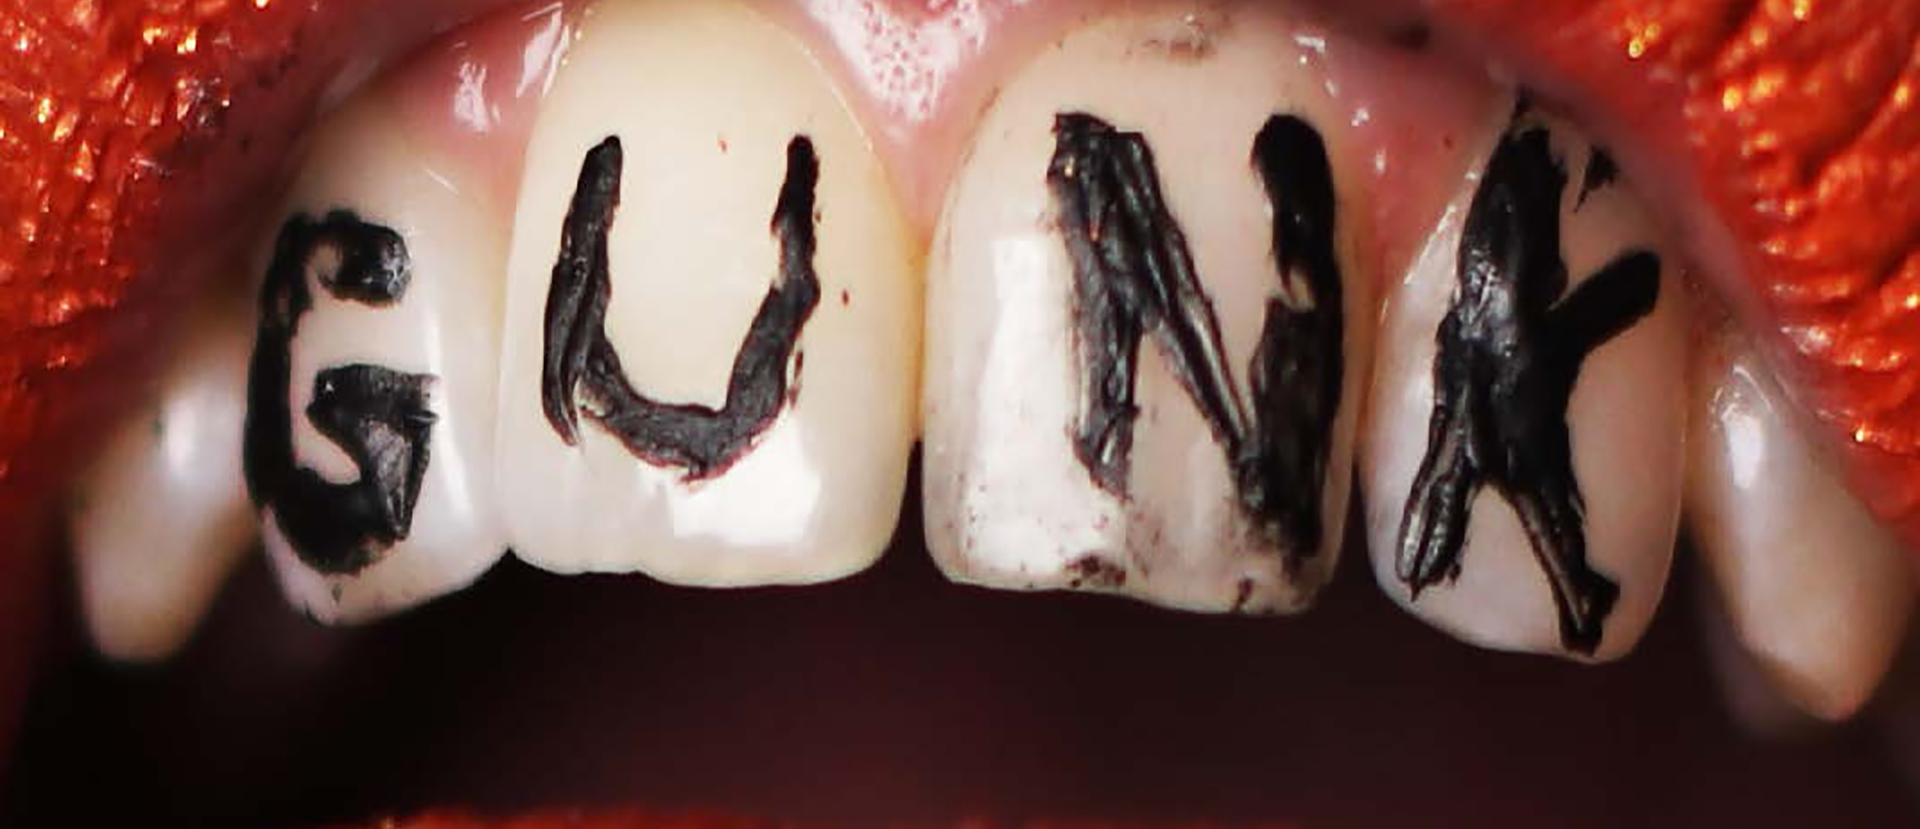 Image shows teeth, with the word 'GUNK' wrote on them in black make-up 